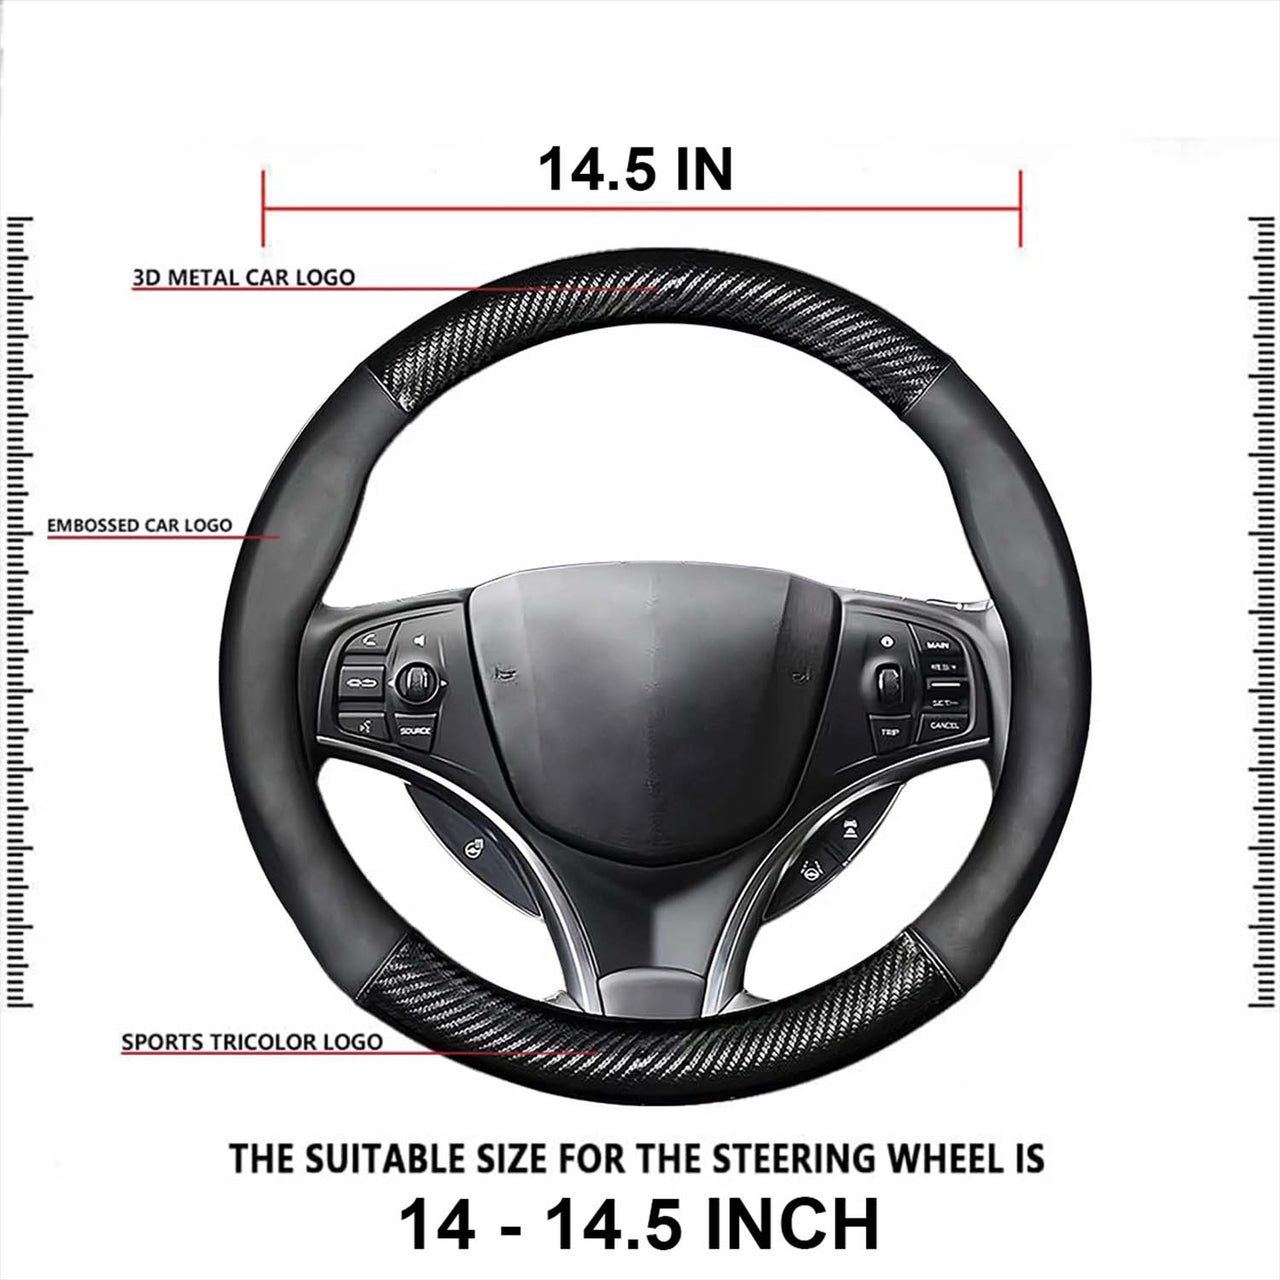 Car Steering Wheel Cover, Custom Fit For Your Cars, Leather Nonslip 3D Carbon Fiber Texture Sport Style Wheel Cover for Women, Interior Modification for All Car Accessories LI18992